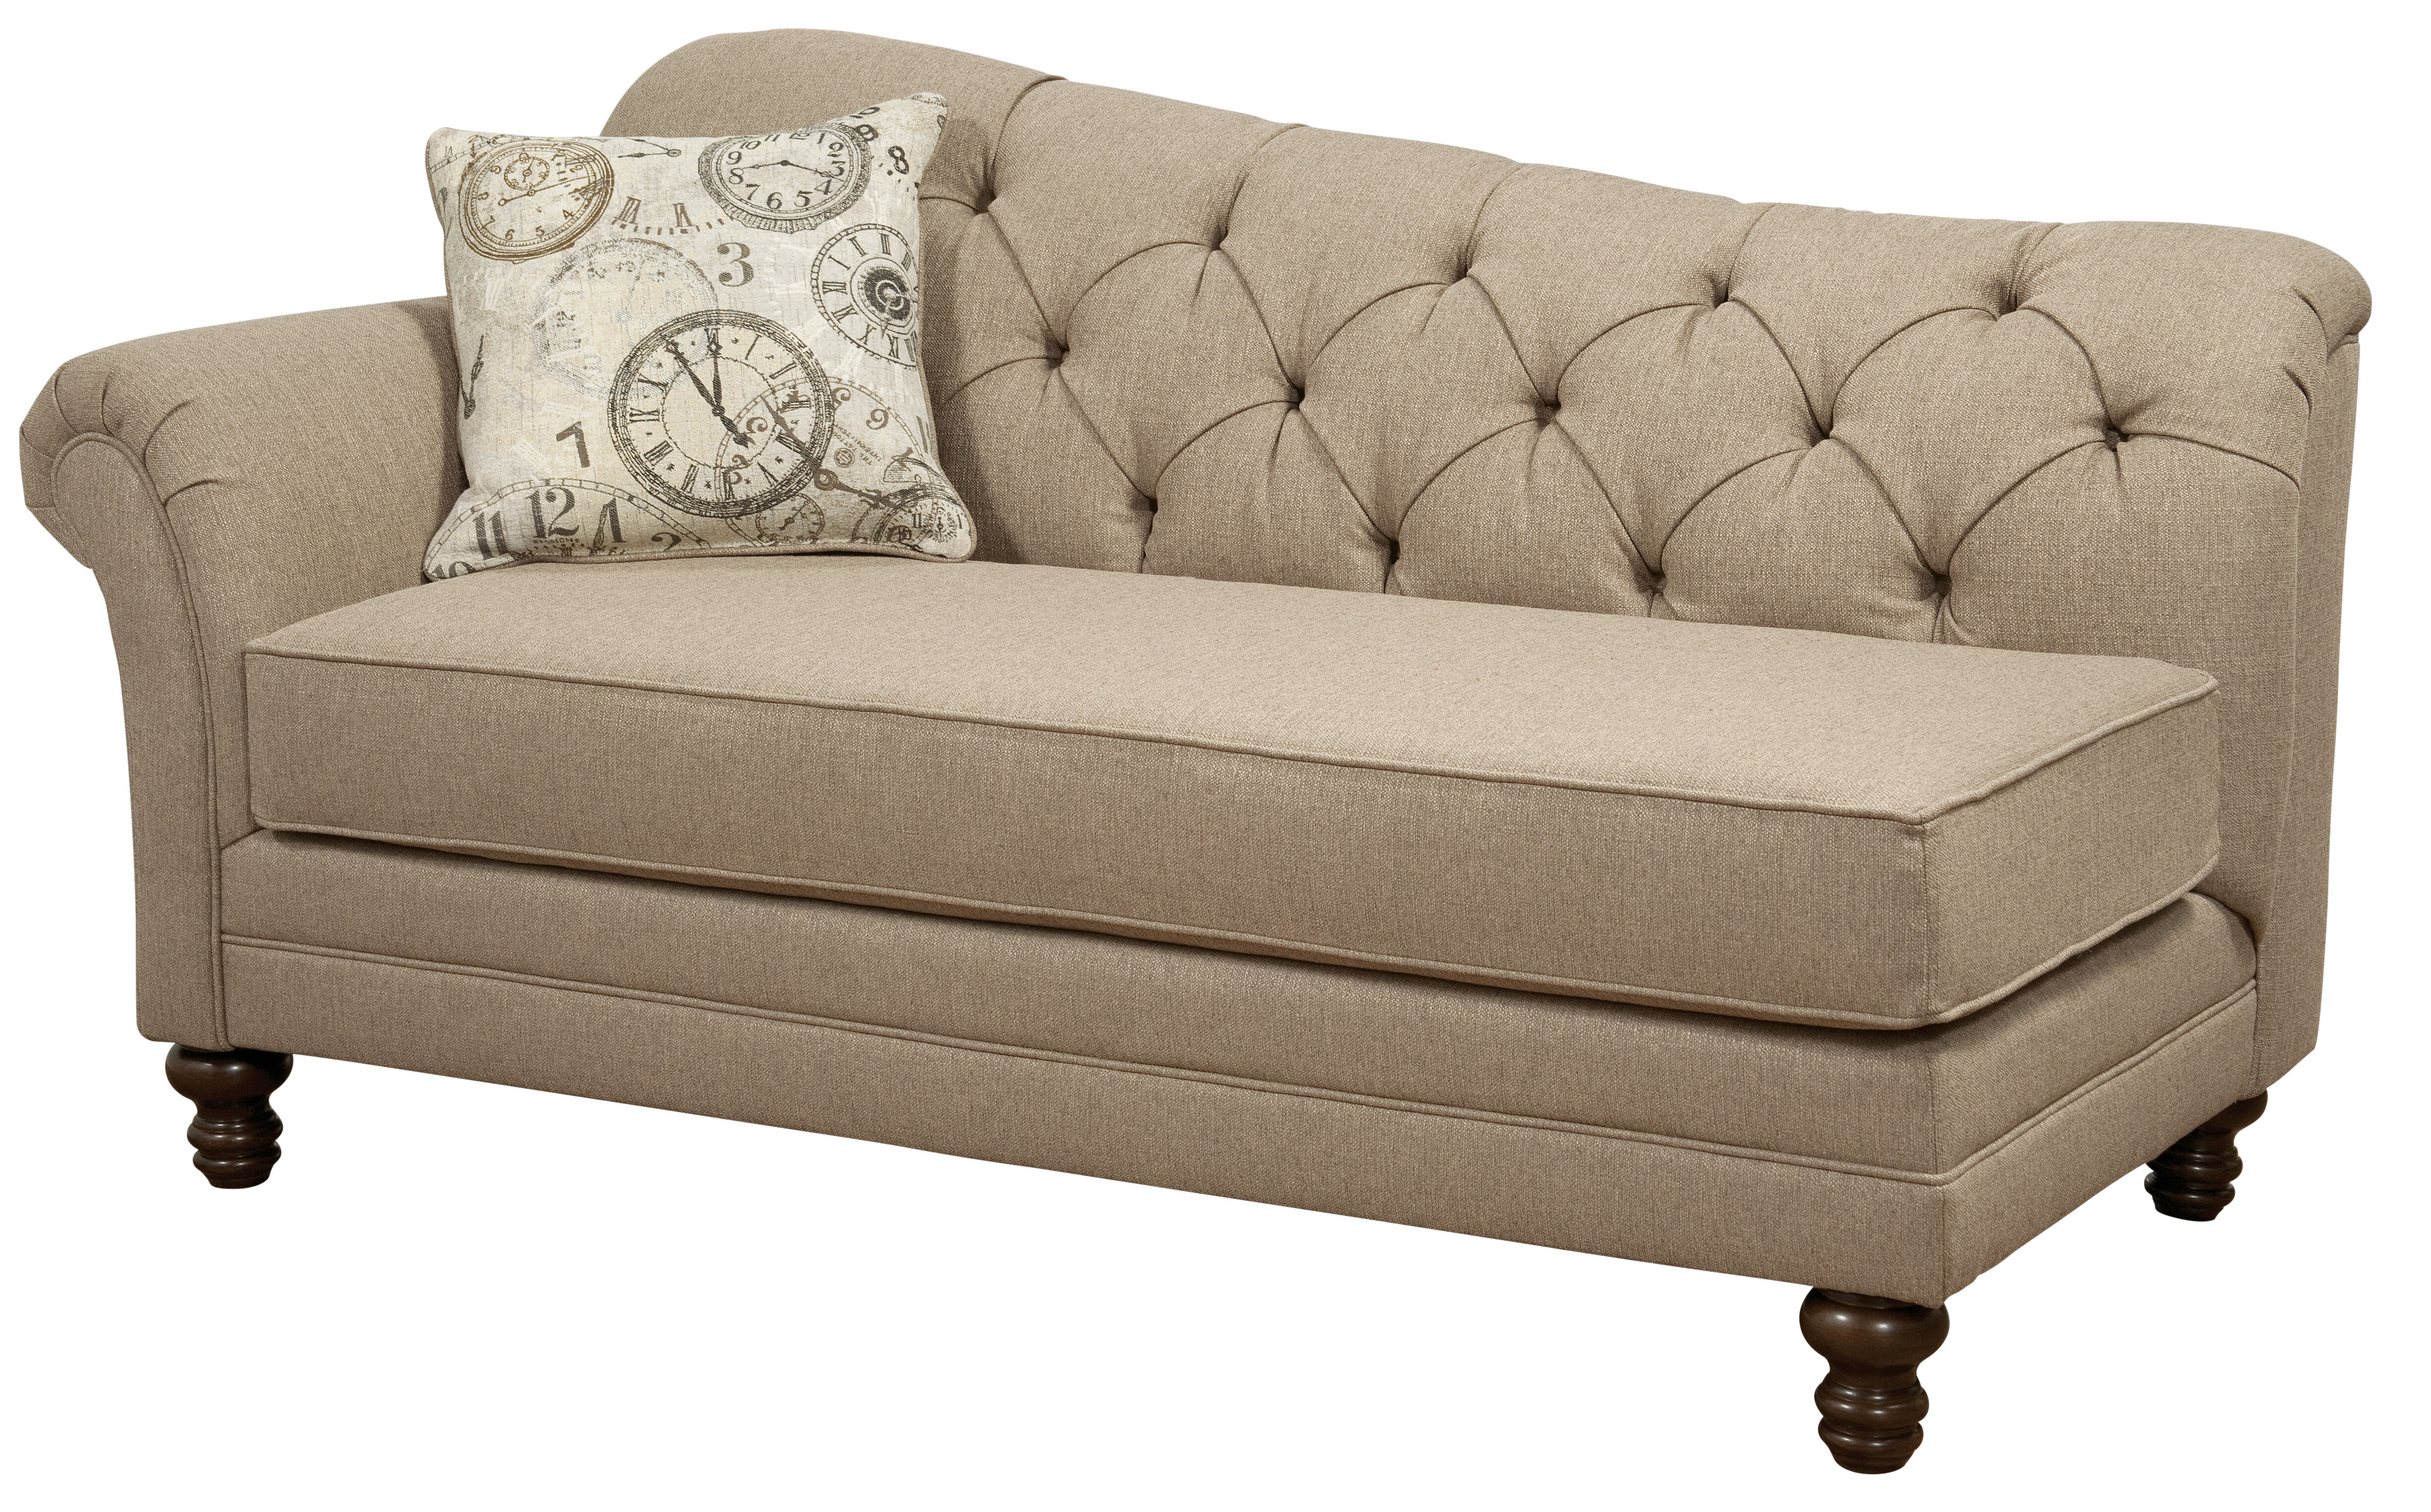 Crippen Upholstered Chaise Lounge